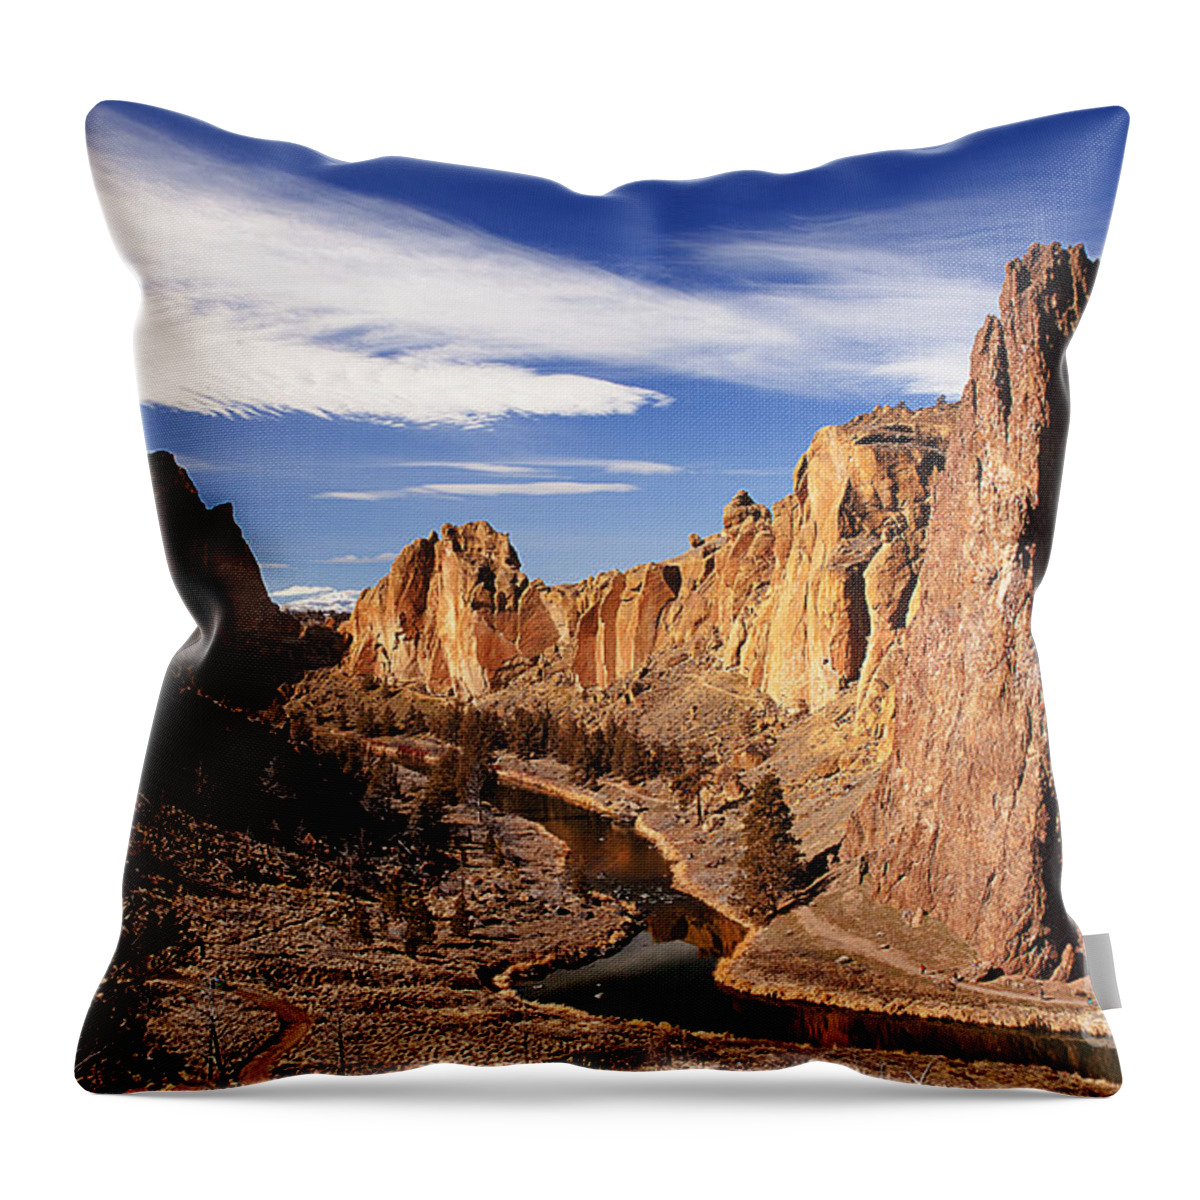 Scenic Rocky Mountain River Rocks Photography Throw Pillow featuring the photograph Scenic Smith Rock Mountains With Rugged Cliffs Flowing River by Jerry Cowart